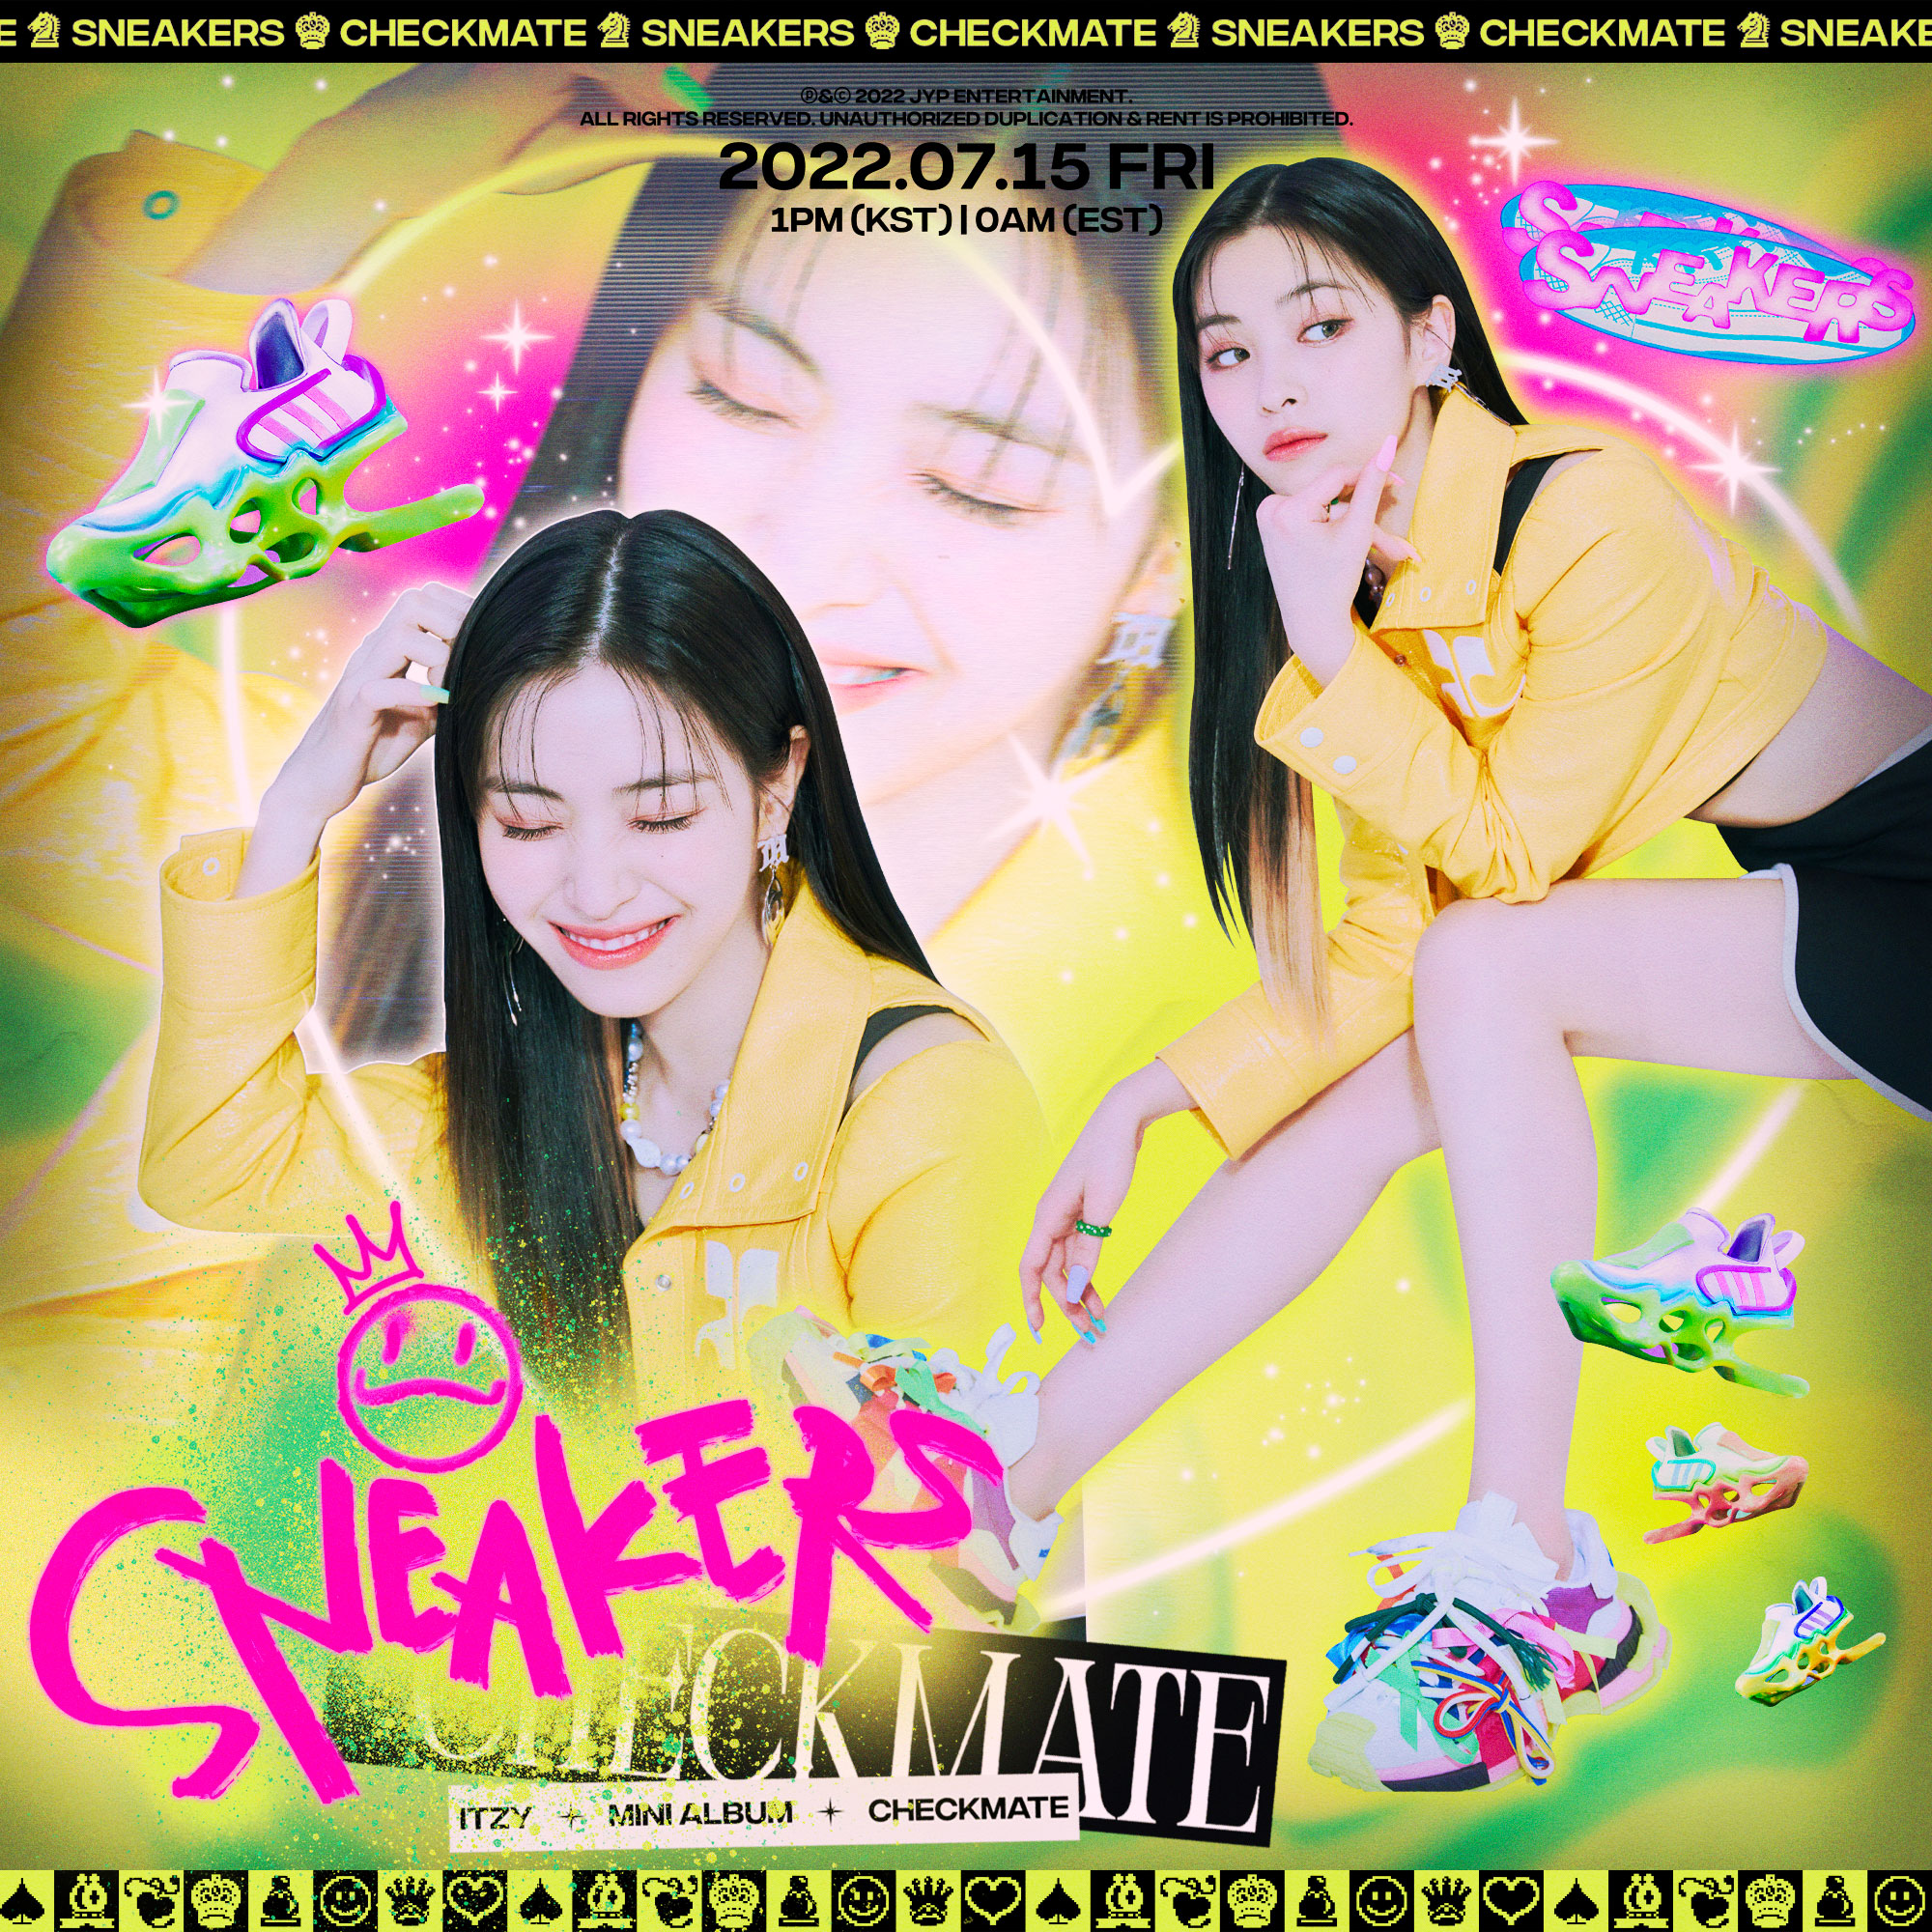 ITZY unveils #Yeji's SNEAKERS concept photo for their EP